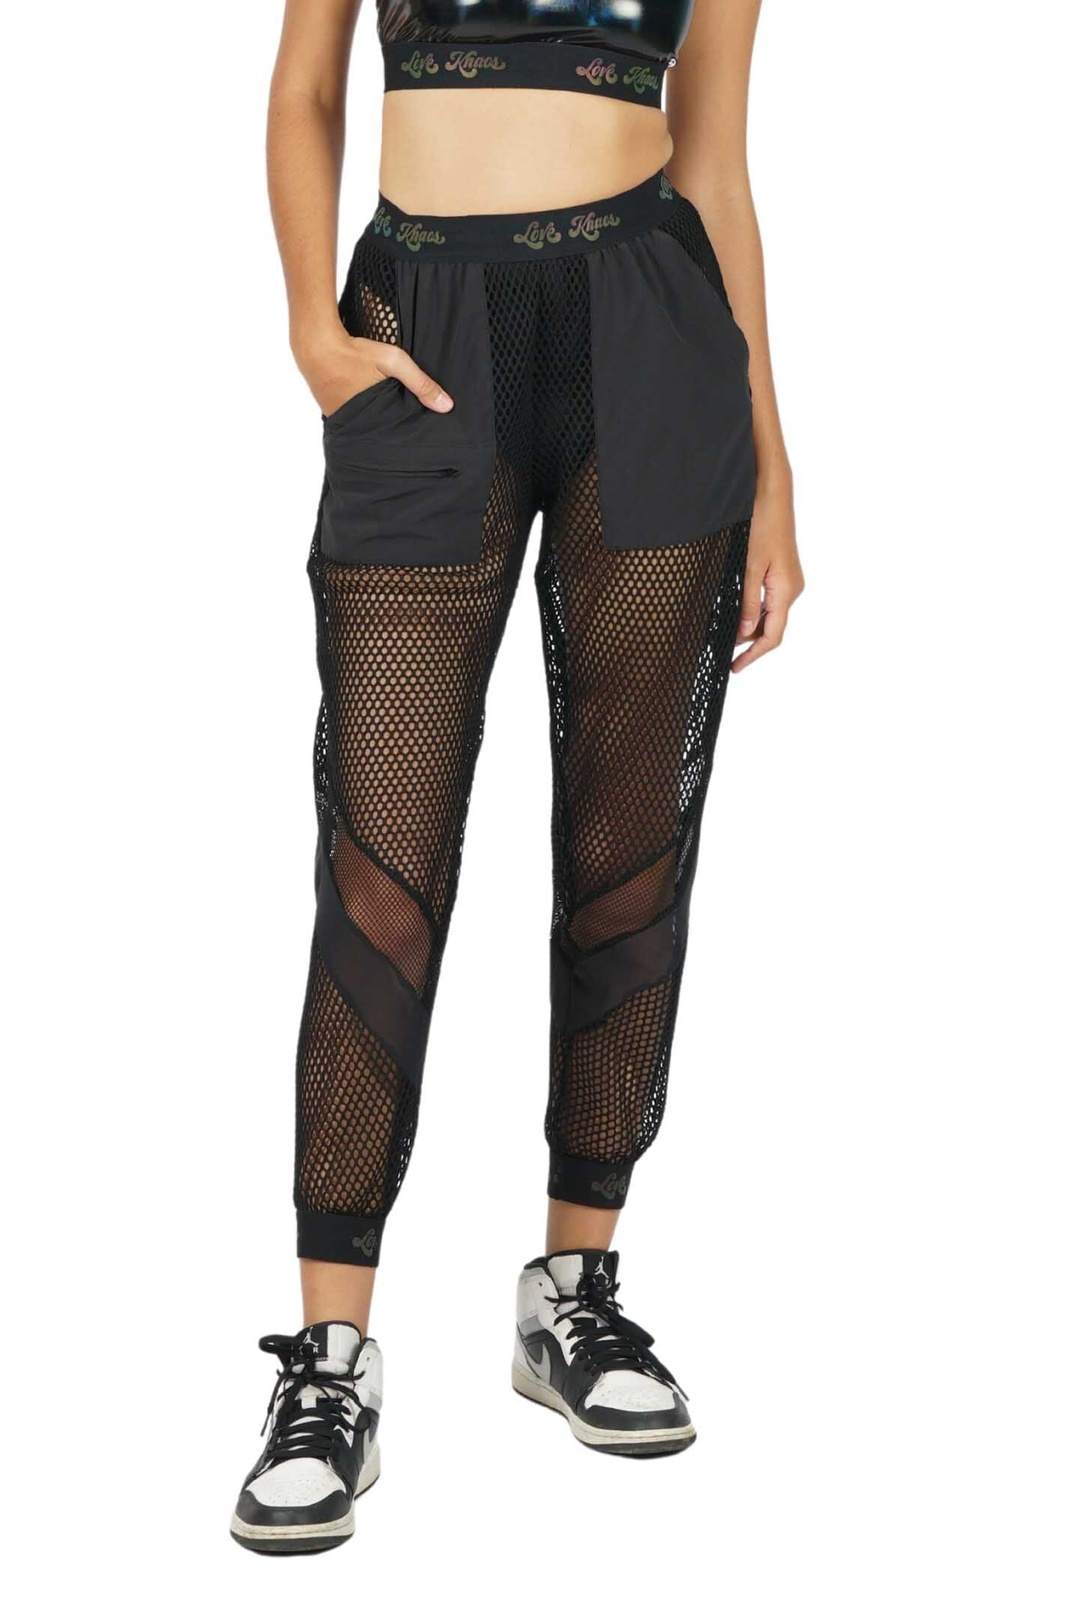 Black mixed mesh joggers with reflective elastic waistband from Love Khaos.